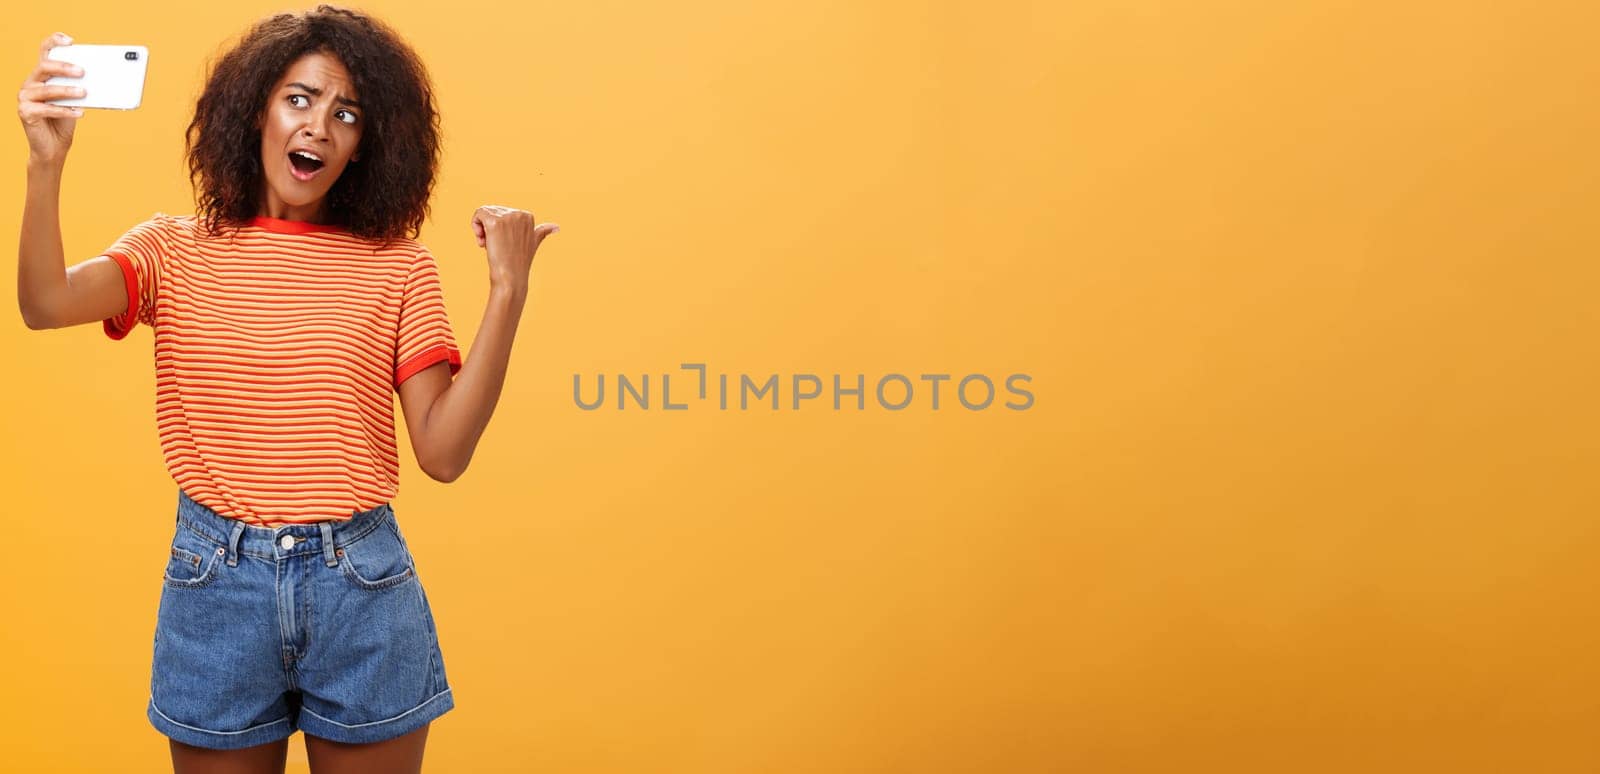 Woman recording video blog pointing at strange object behind her. Portrait of concerned and curious stylish famous internet star holding smartphone talking in cellphone camera over orange background. Technology concept